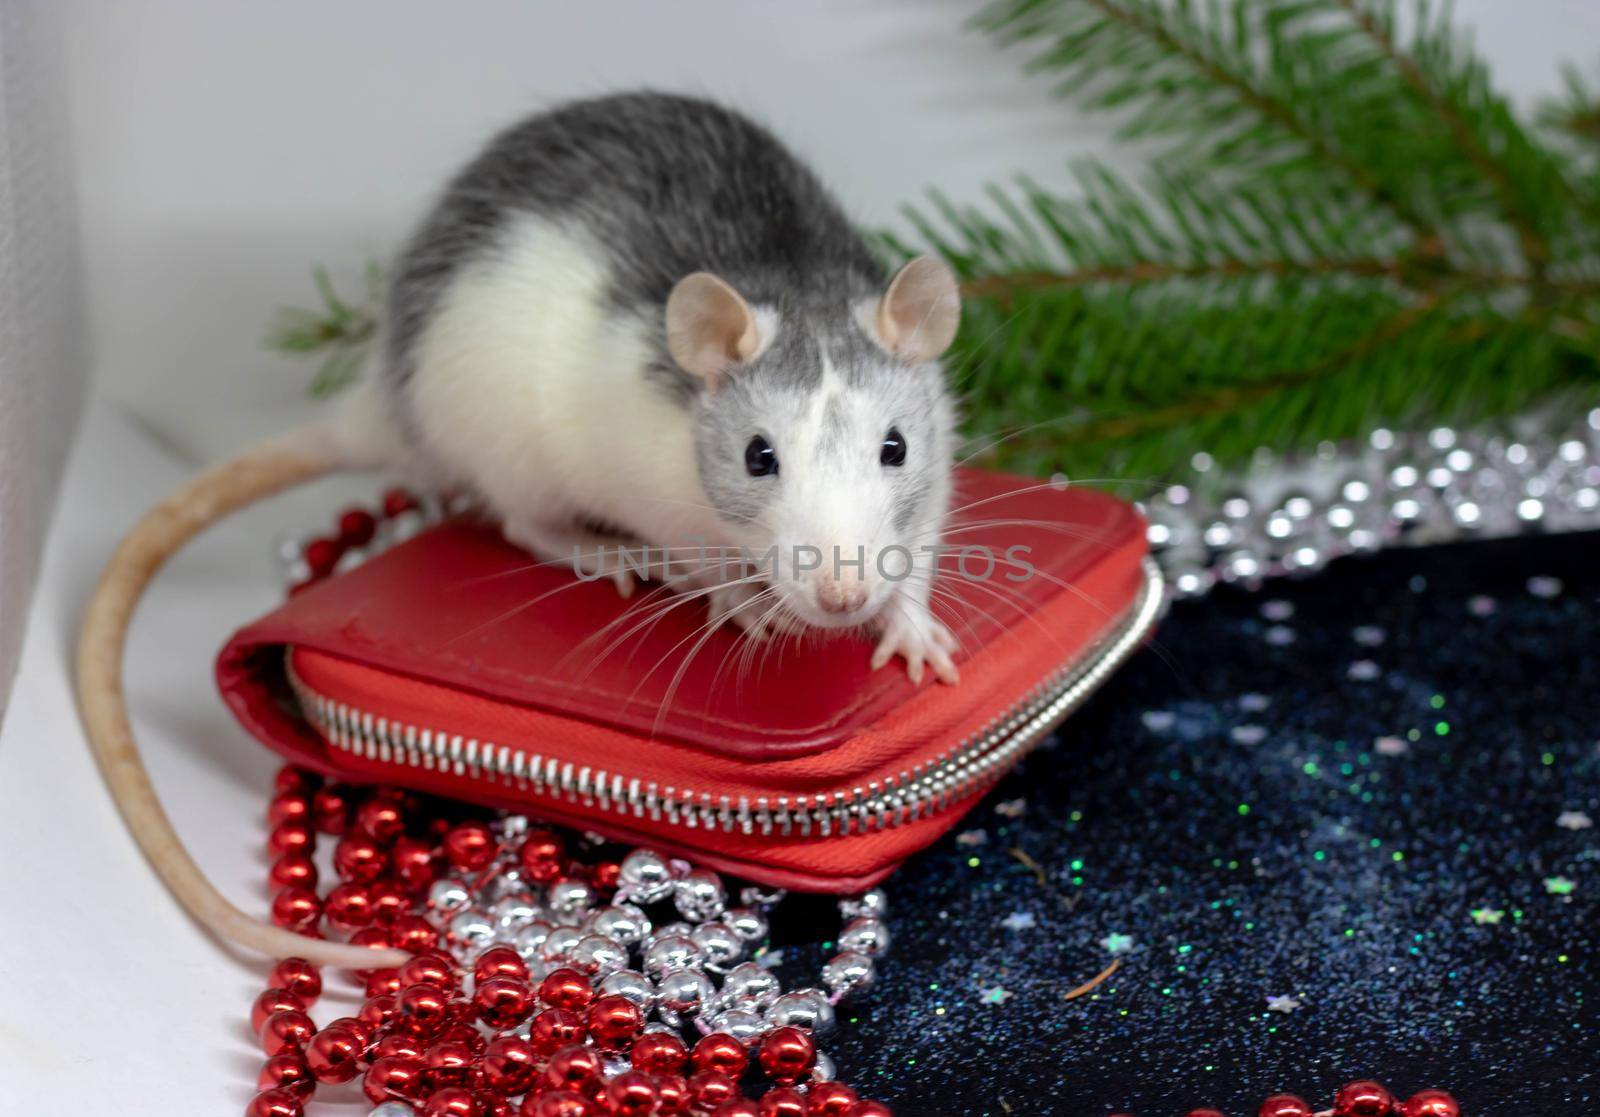 Happy New Year Symbol of 2020 New Year - white or metal silver rat. Cute rat in hat. Lady like. Reflection in mirror. Fun New Year animal, funny pet - rat. Chinese zodiac, eastern horoscope 2020 by lapushka62